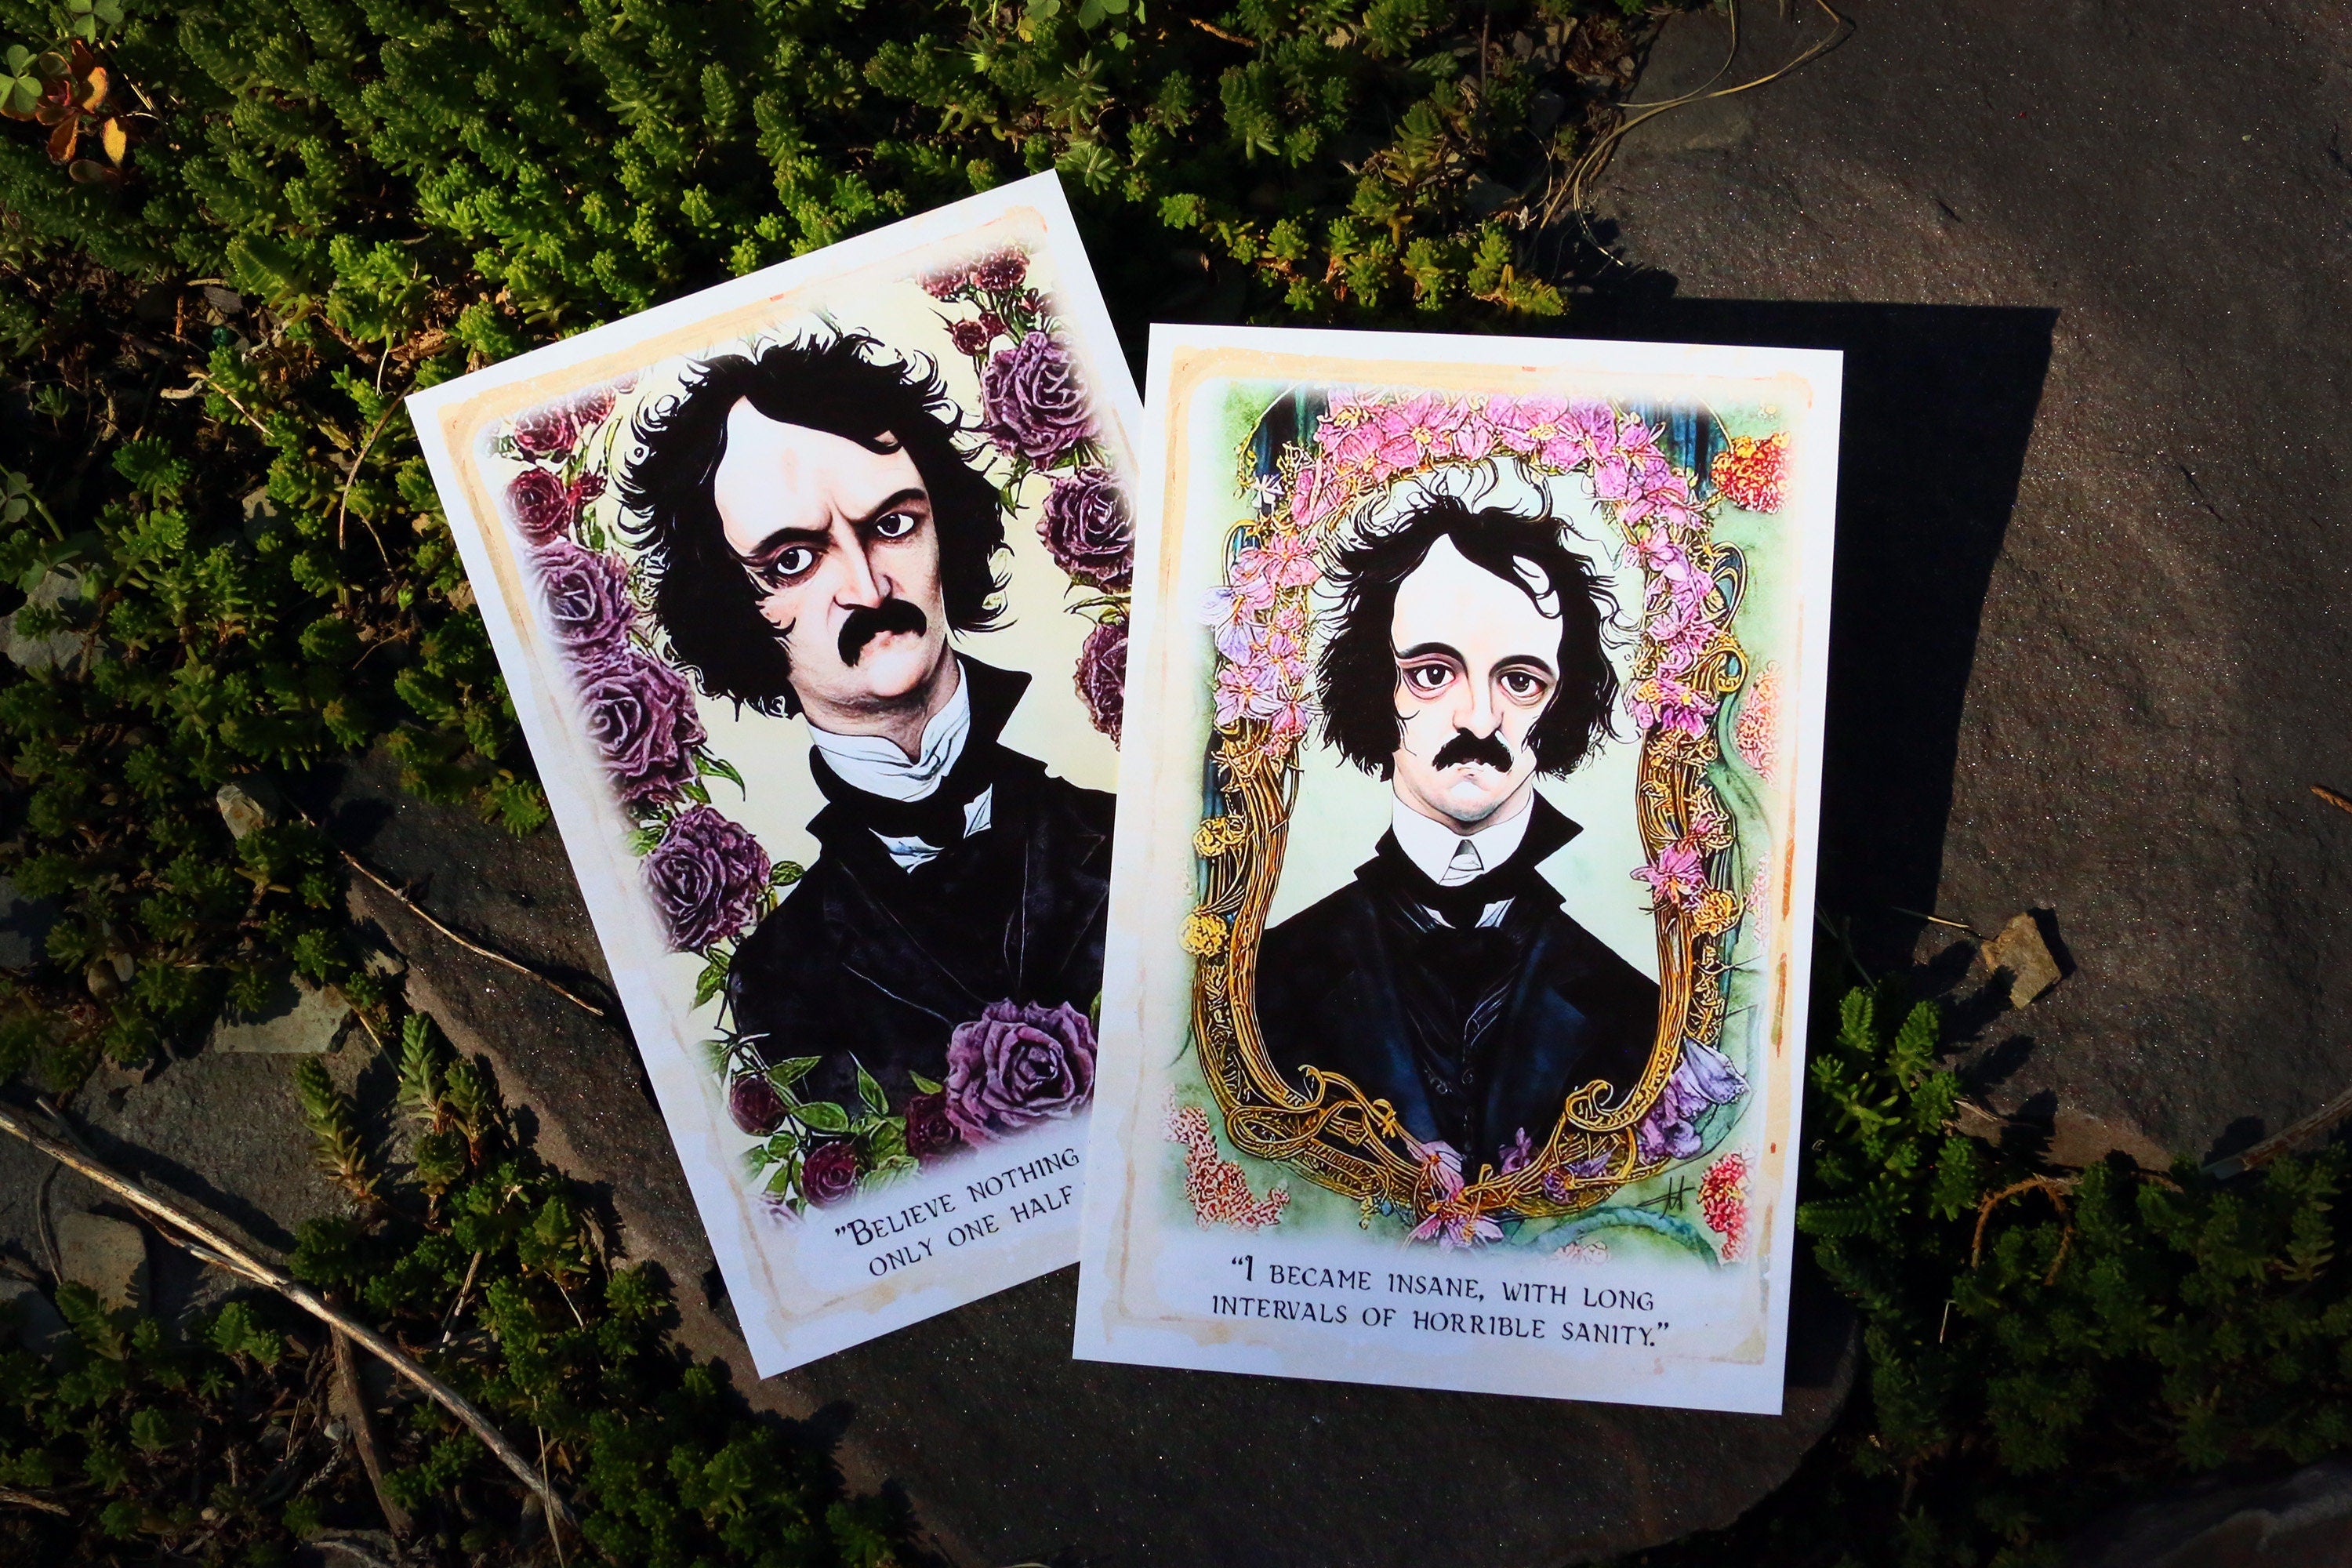 Watercolor Portrait of Edgar Allan Poe, Postcard/Greeting Card Set, Exclusively Designed, 6 Designs, 12 Cards